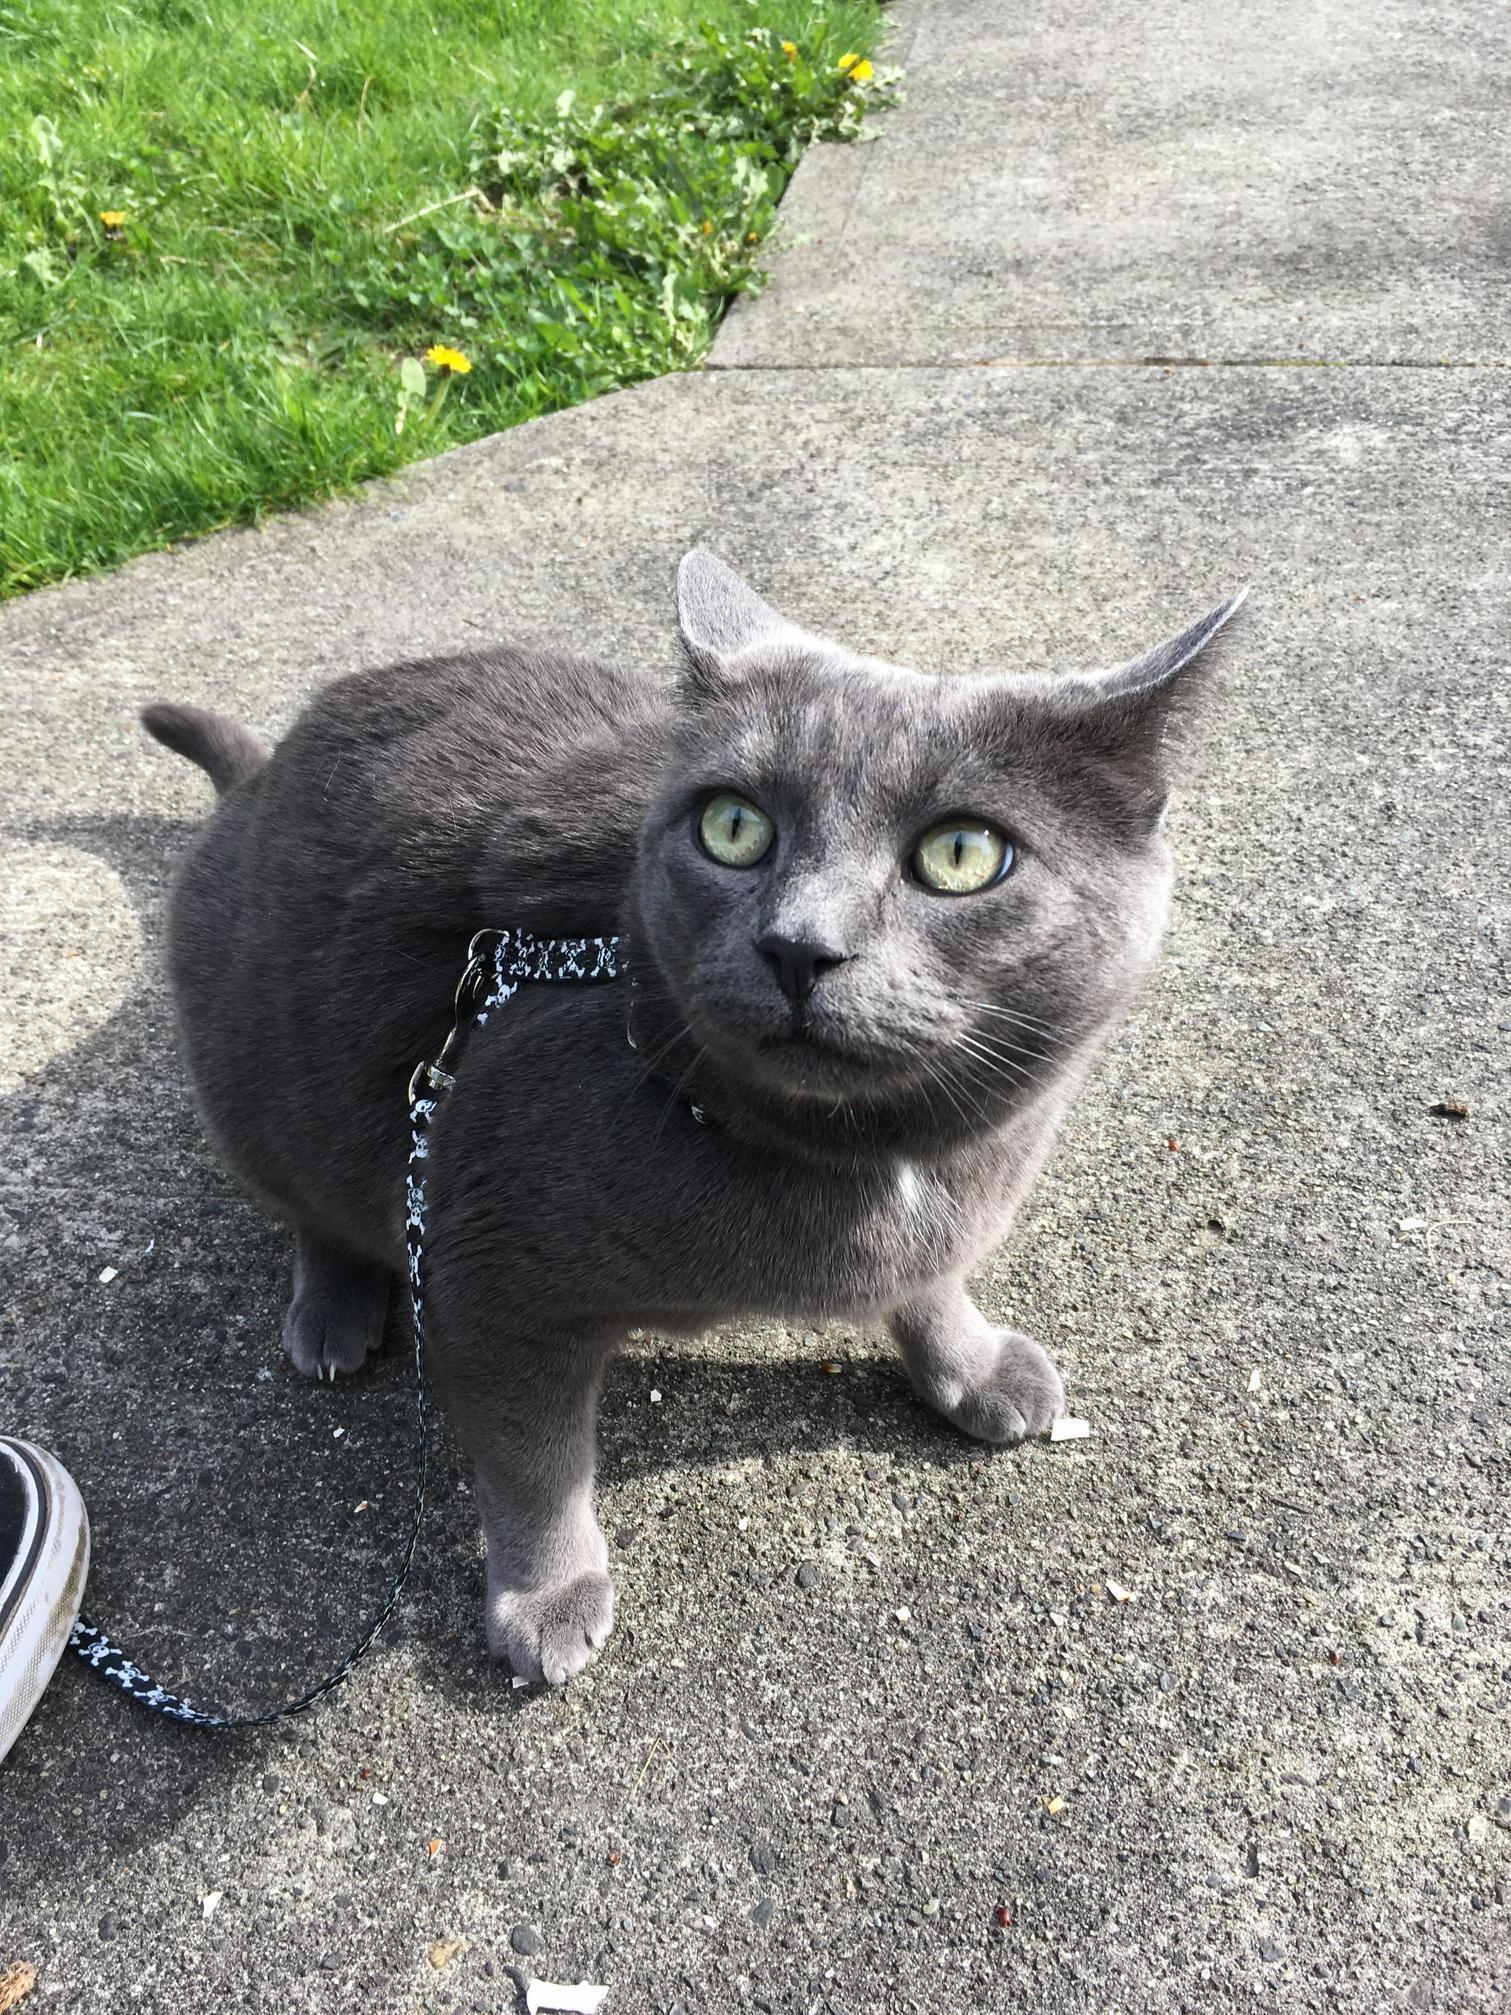 This is rue, shes not allowed outside by herself in the big city. shes still adjusting to the harness and leash but loves being able to eat grass